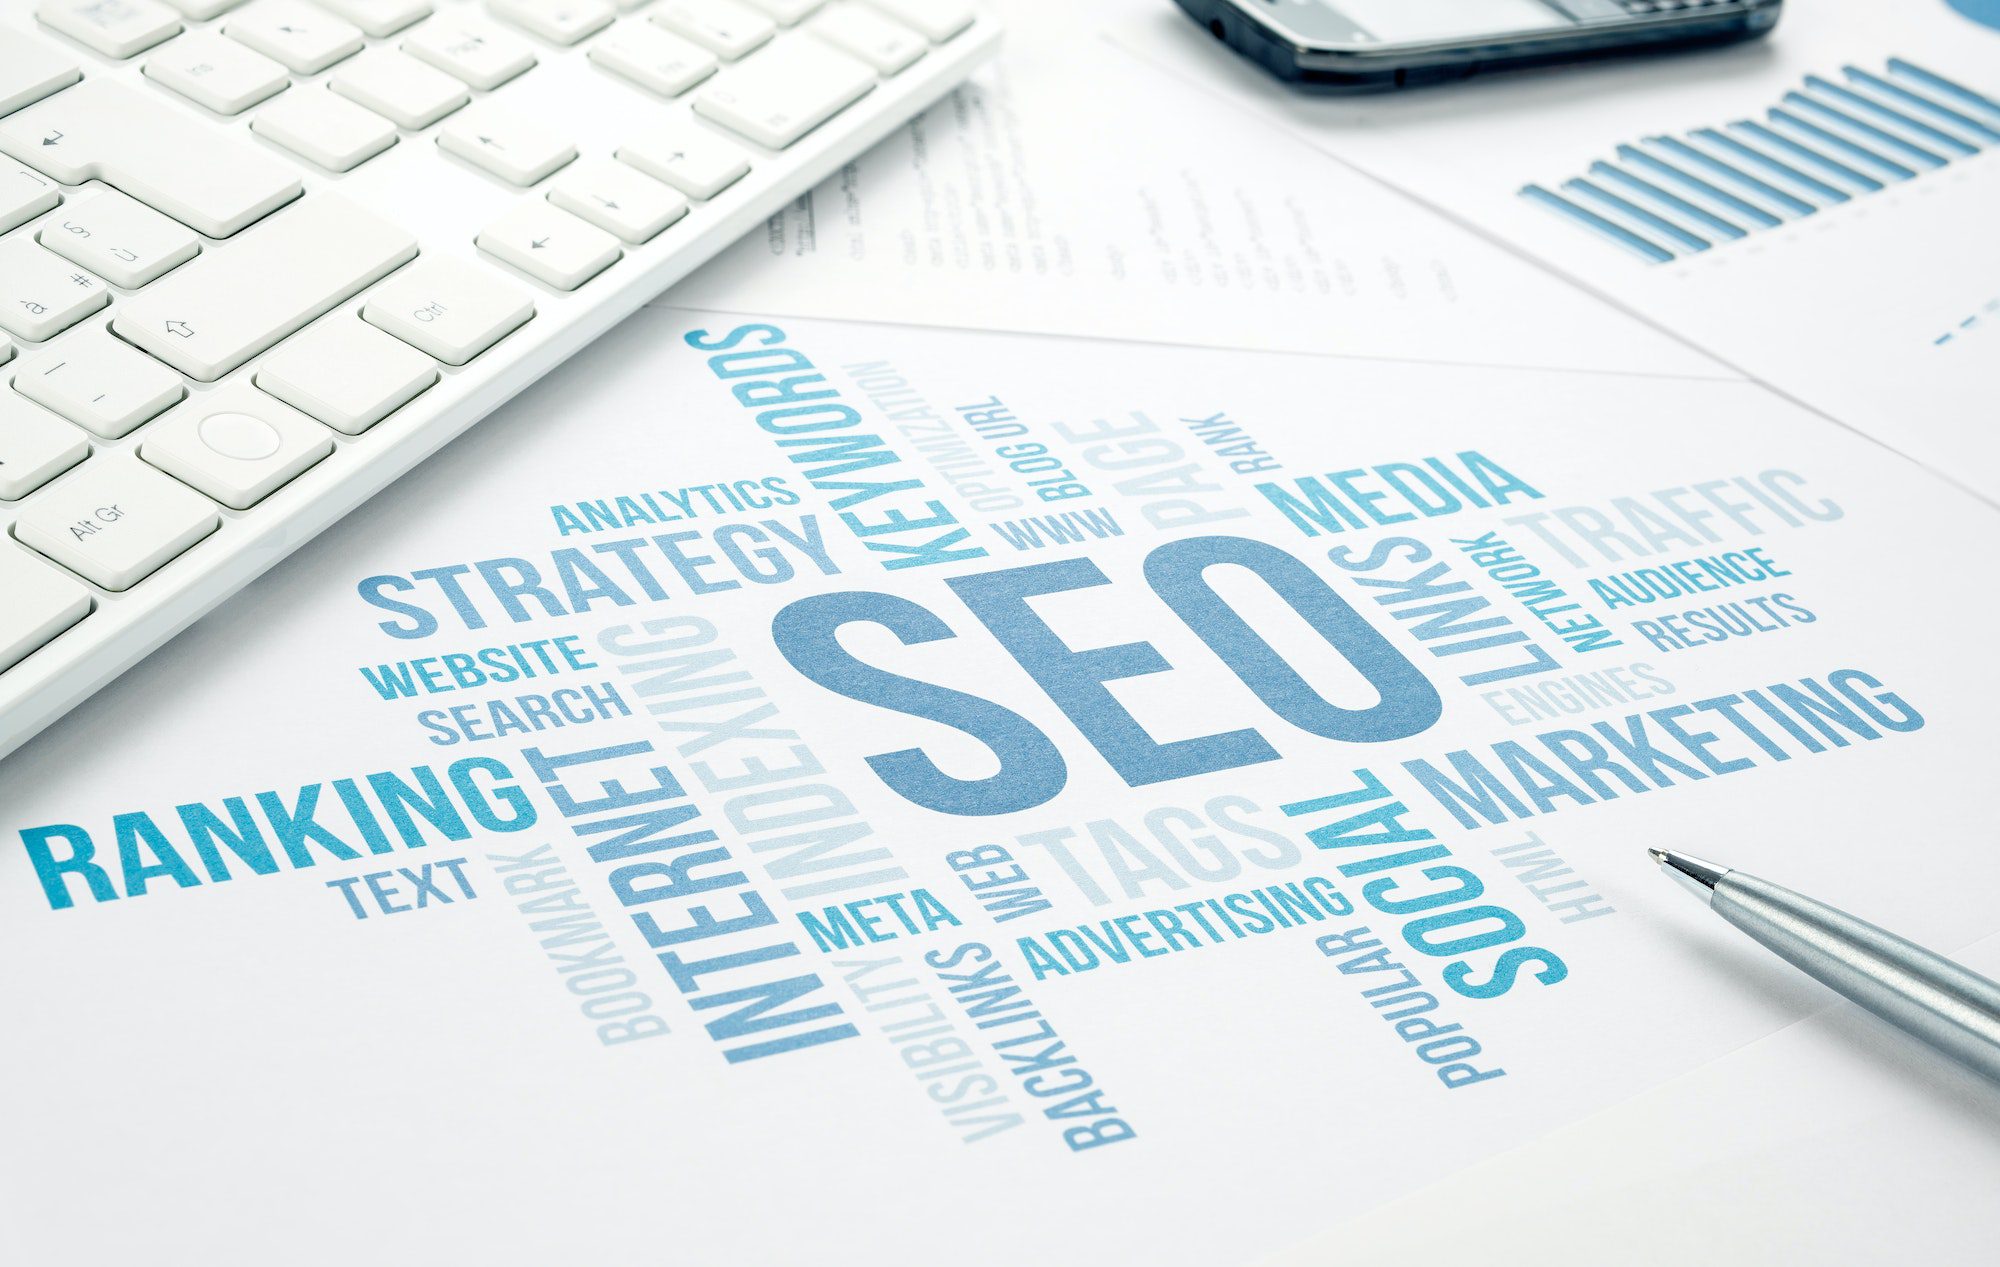 The Definition of Search Engine Optimization